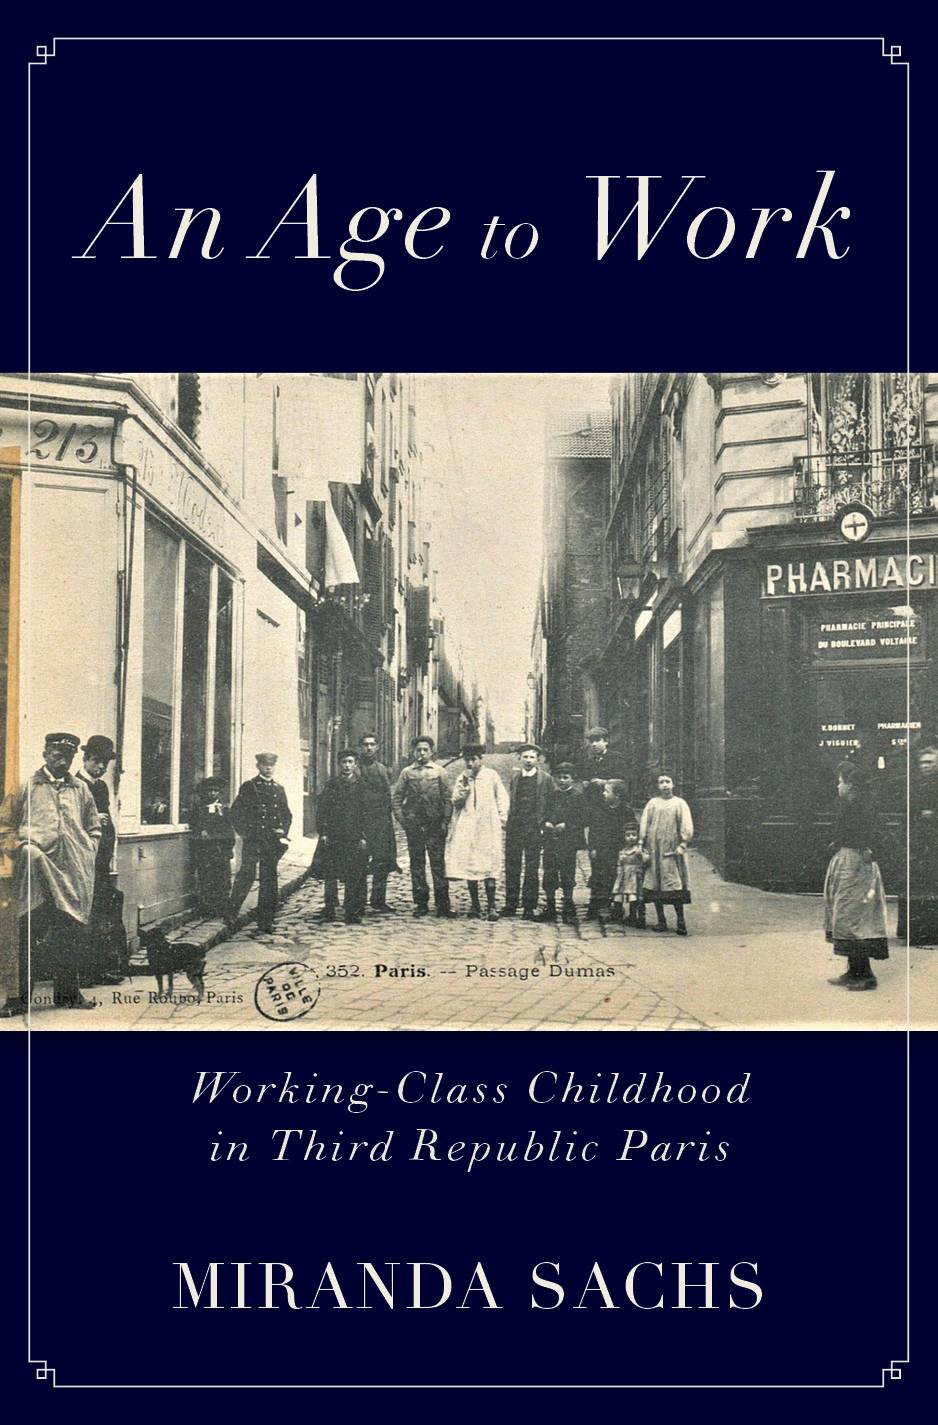 Sachs, An Age to Work, Book Cover